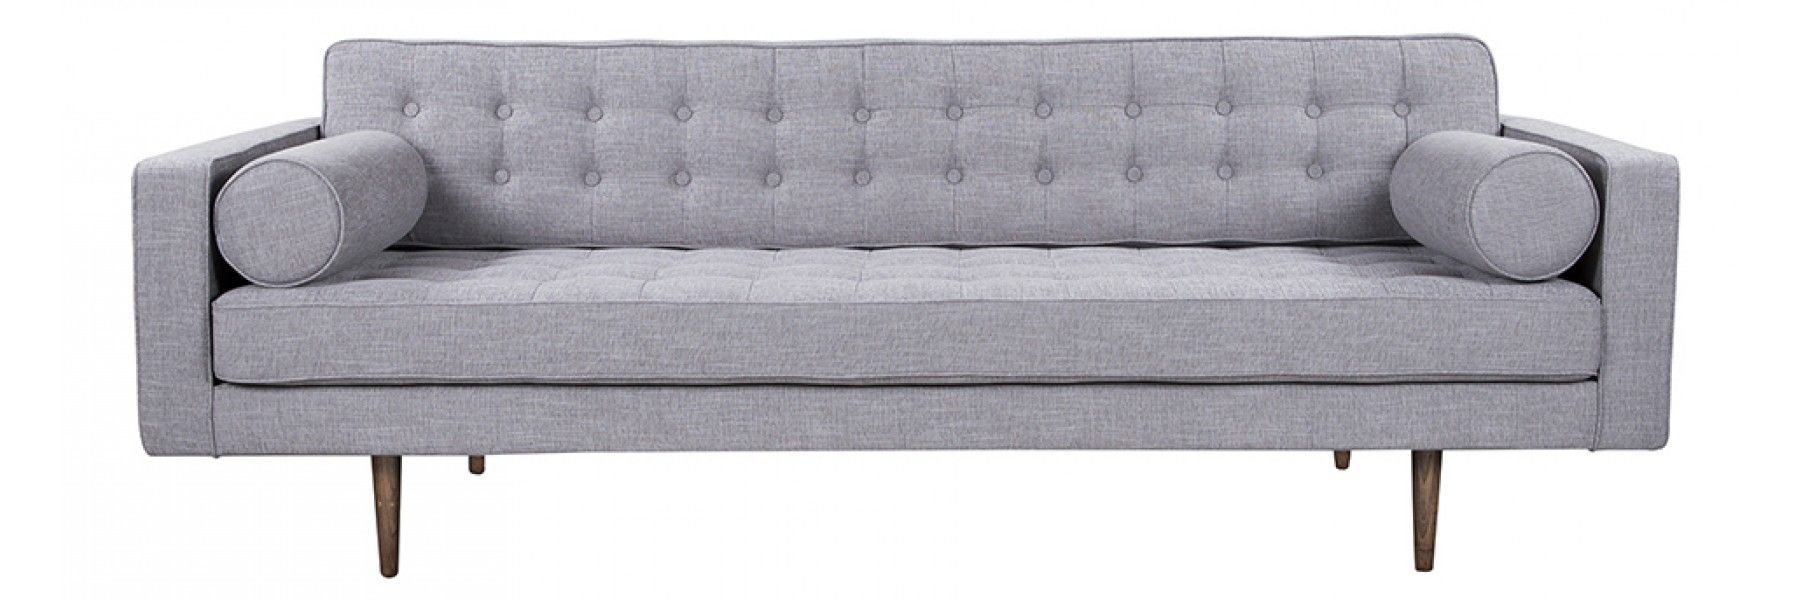 Capetown Sofa Grey In Nico Grey Sectionals With Left Facing Storage Chaise (View 10 of 25)